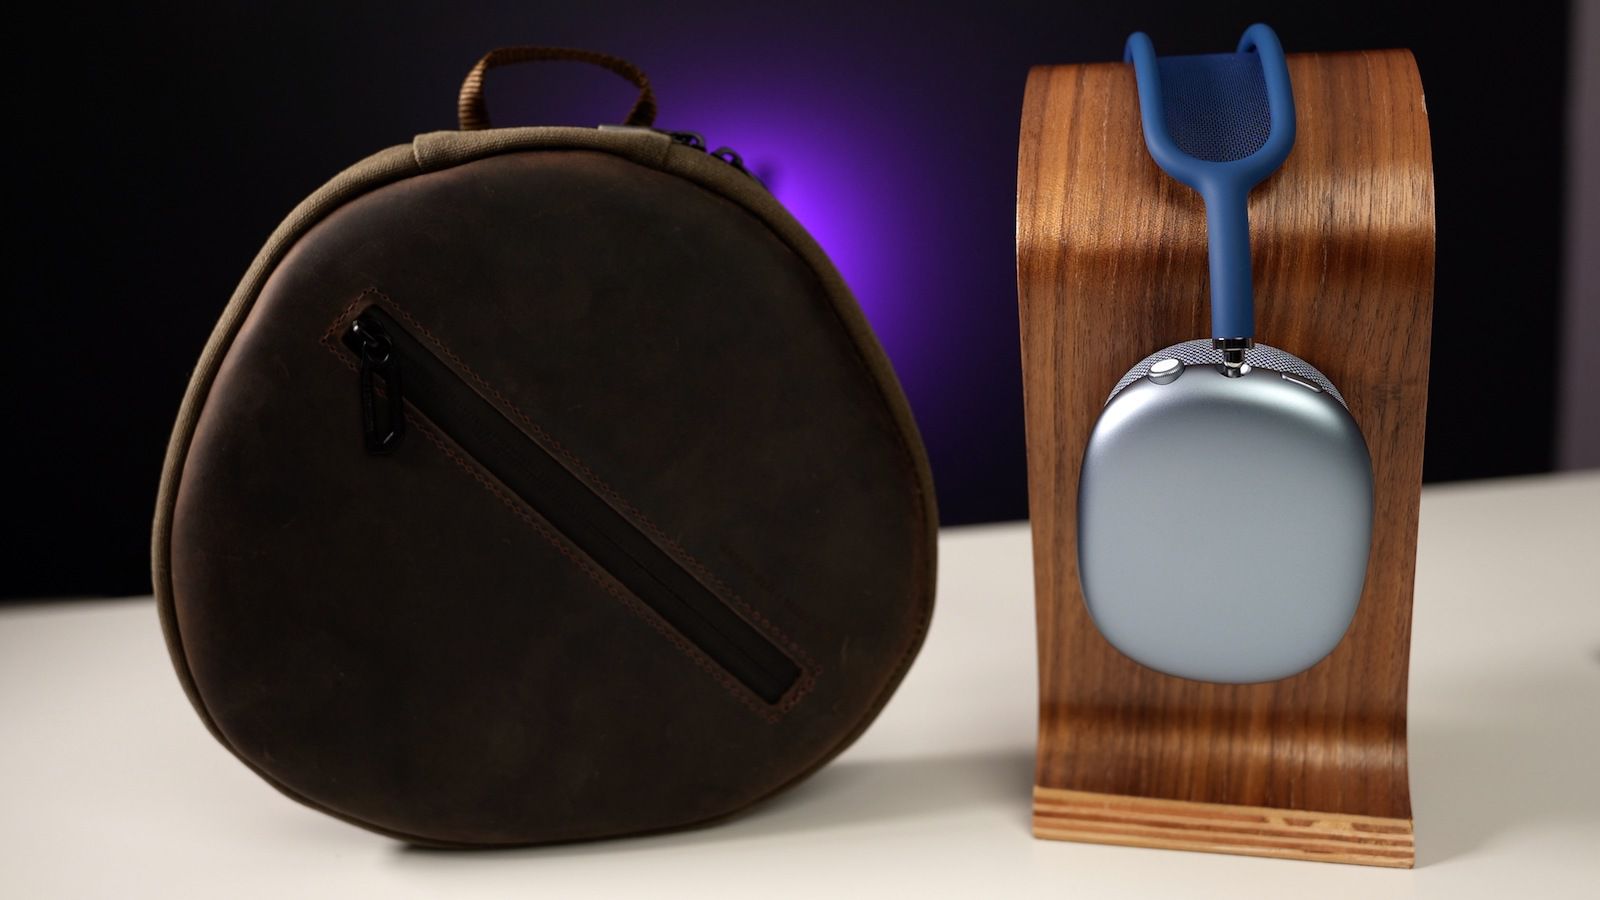 Giveaway MacRumors: Win an Executive Laptop Bag and AirPods Max Shield Case from WaterField Designs